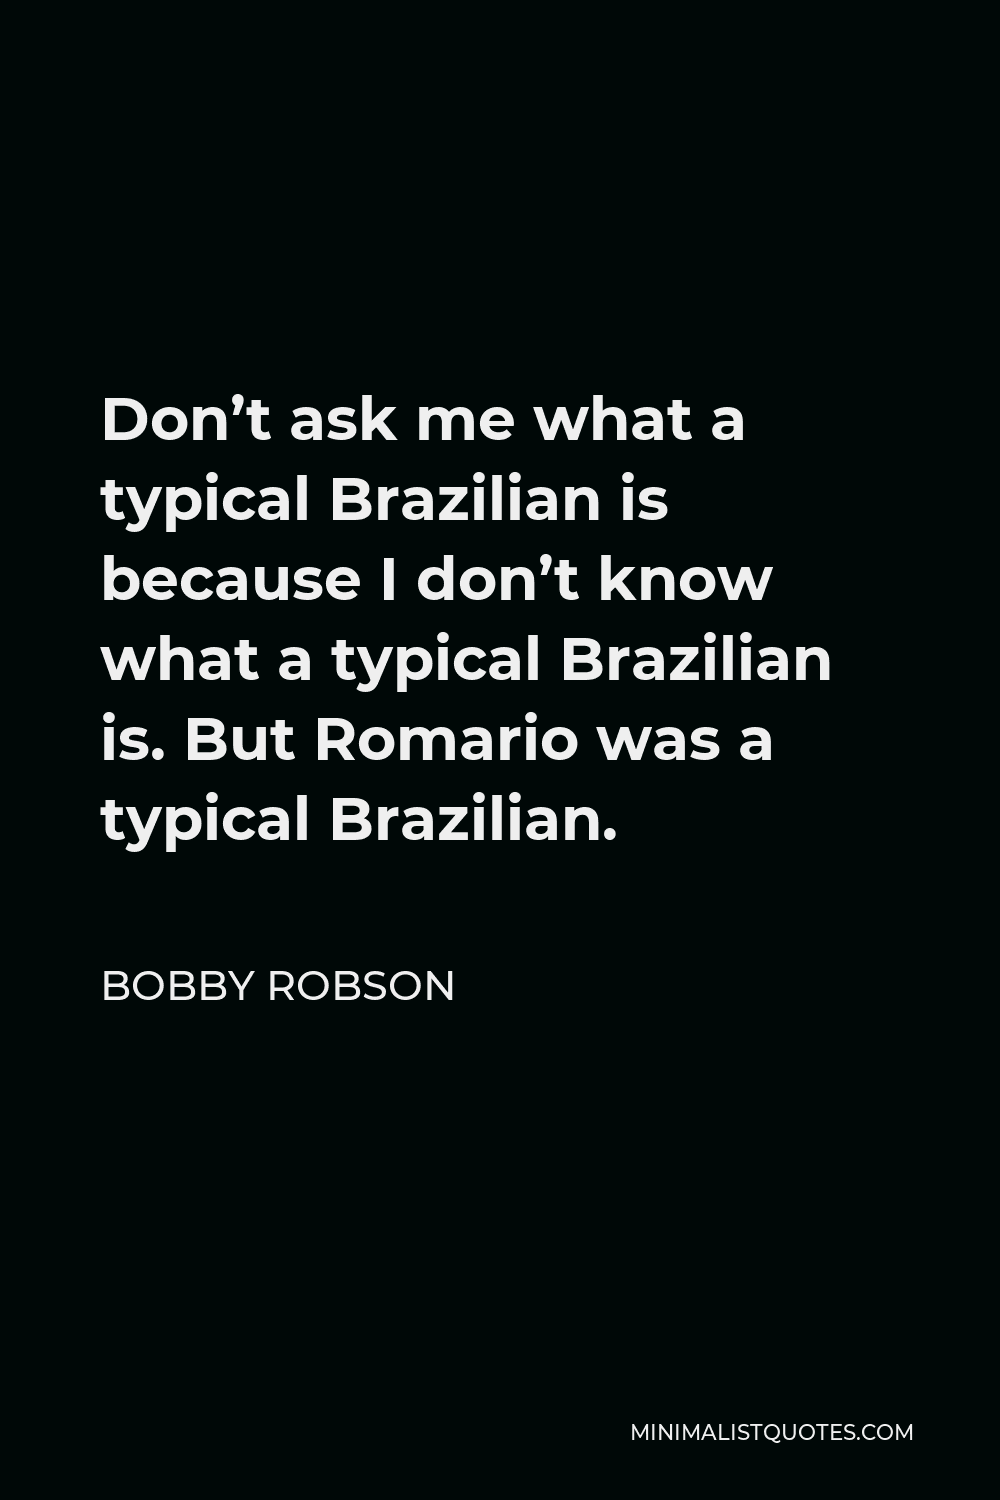 Bobby Robson Quote - Don’t ask me what a typical Brazilian is because I don’t know what a typical Brazilian is. But Romario was a typical Brazilian.